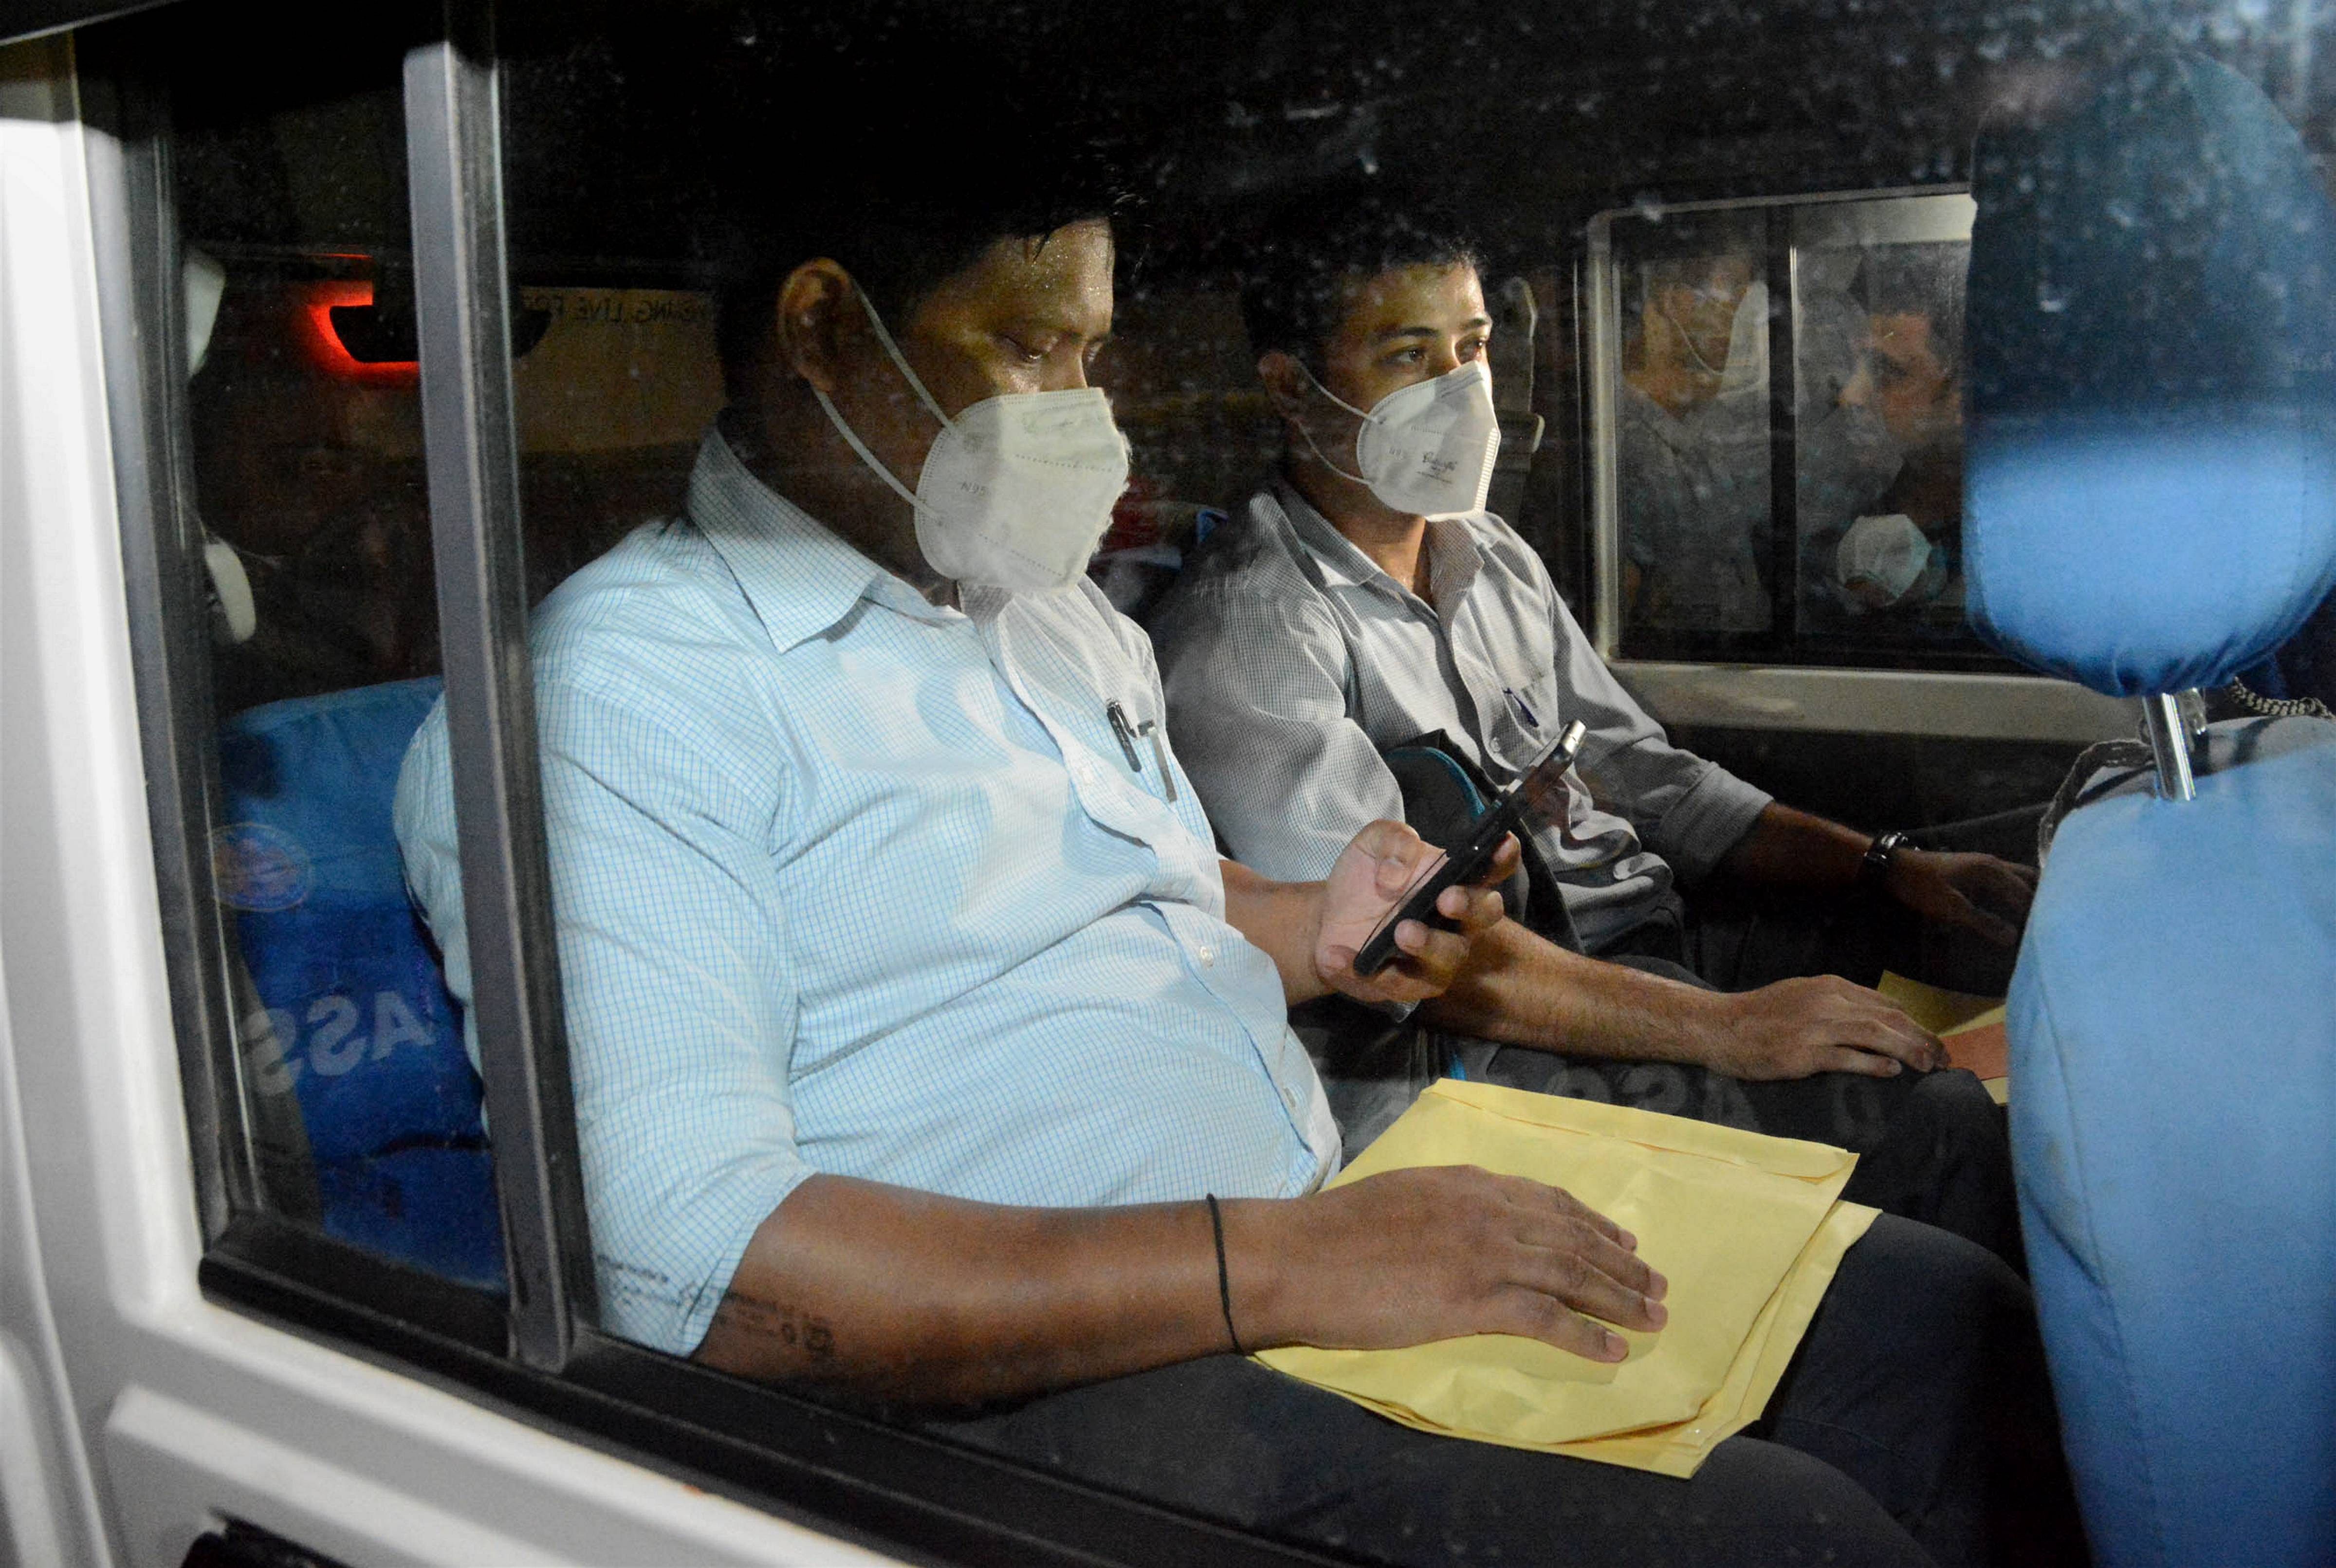 CID officials after conducting a raid at the residence of former Assam Police DIG PK Dutta in connection to his alleged involvement in leakage of question papers, in Guwahati, Thursday, Sept. 24, 2020. Credit: PTI Photo